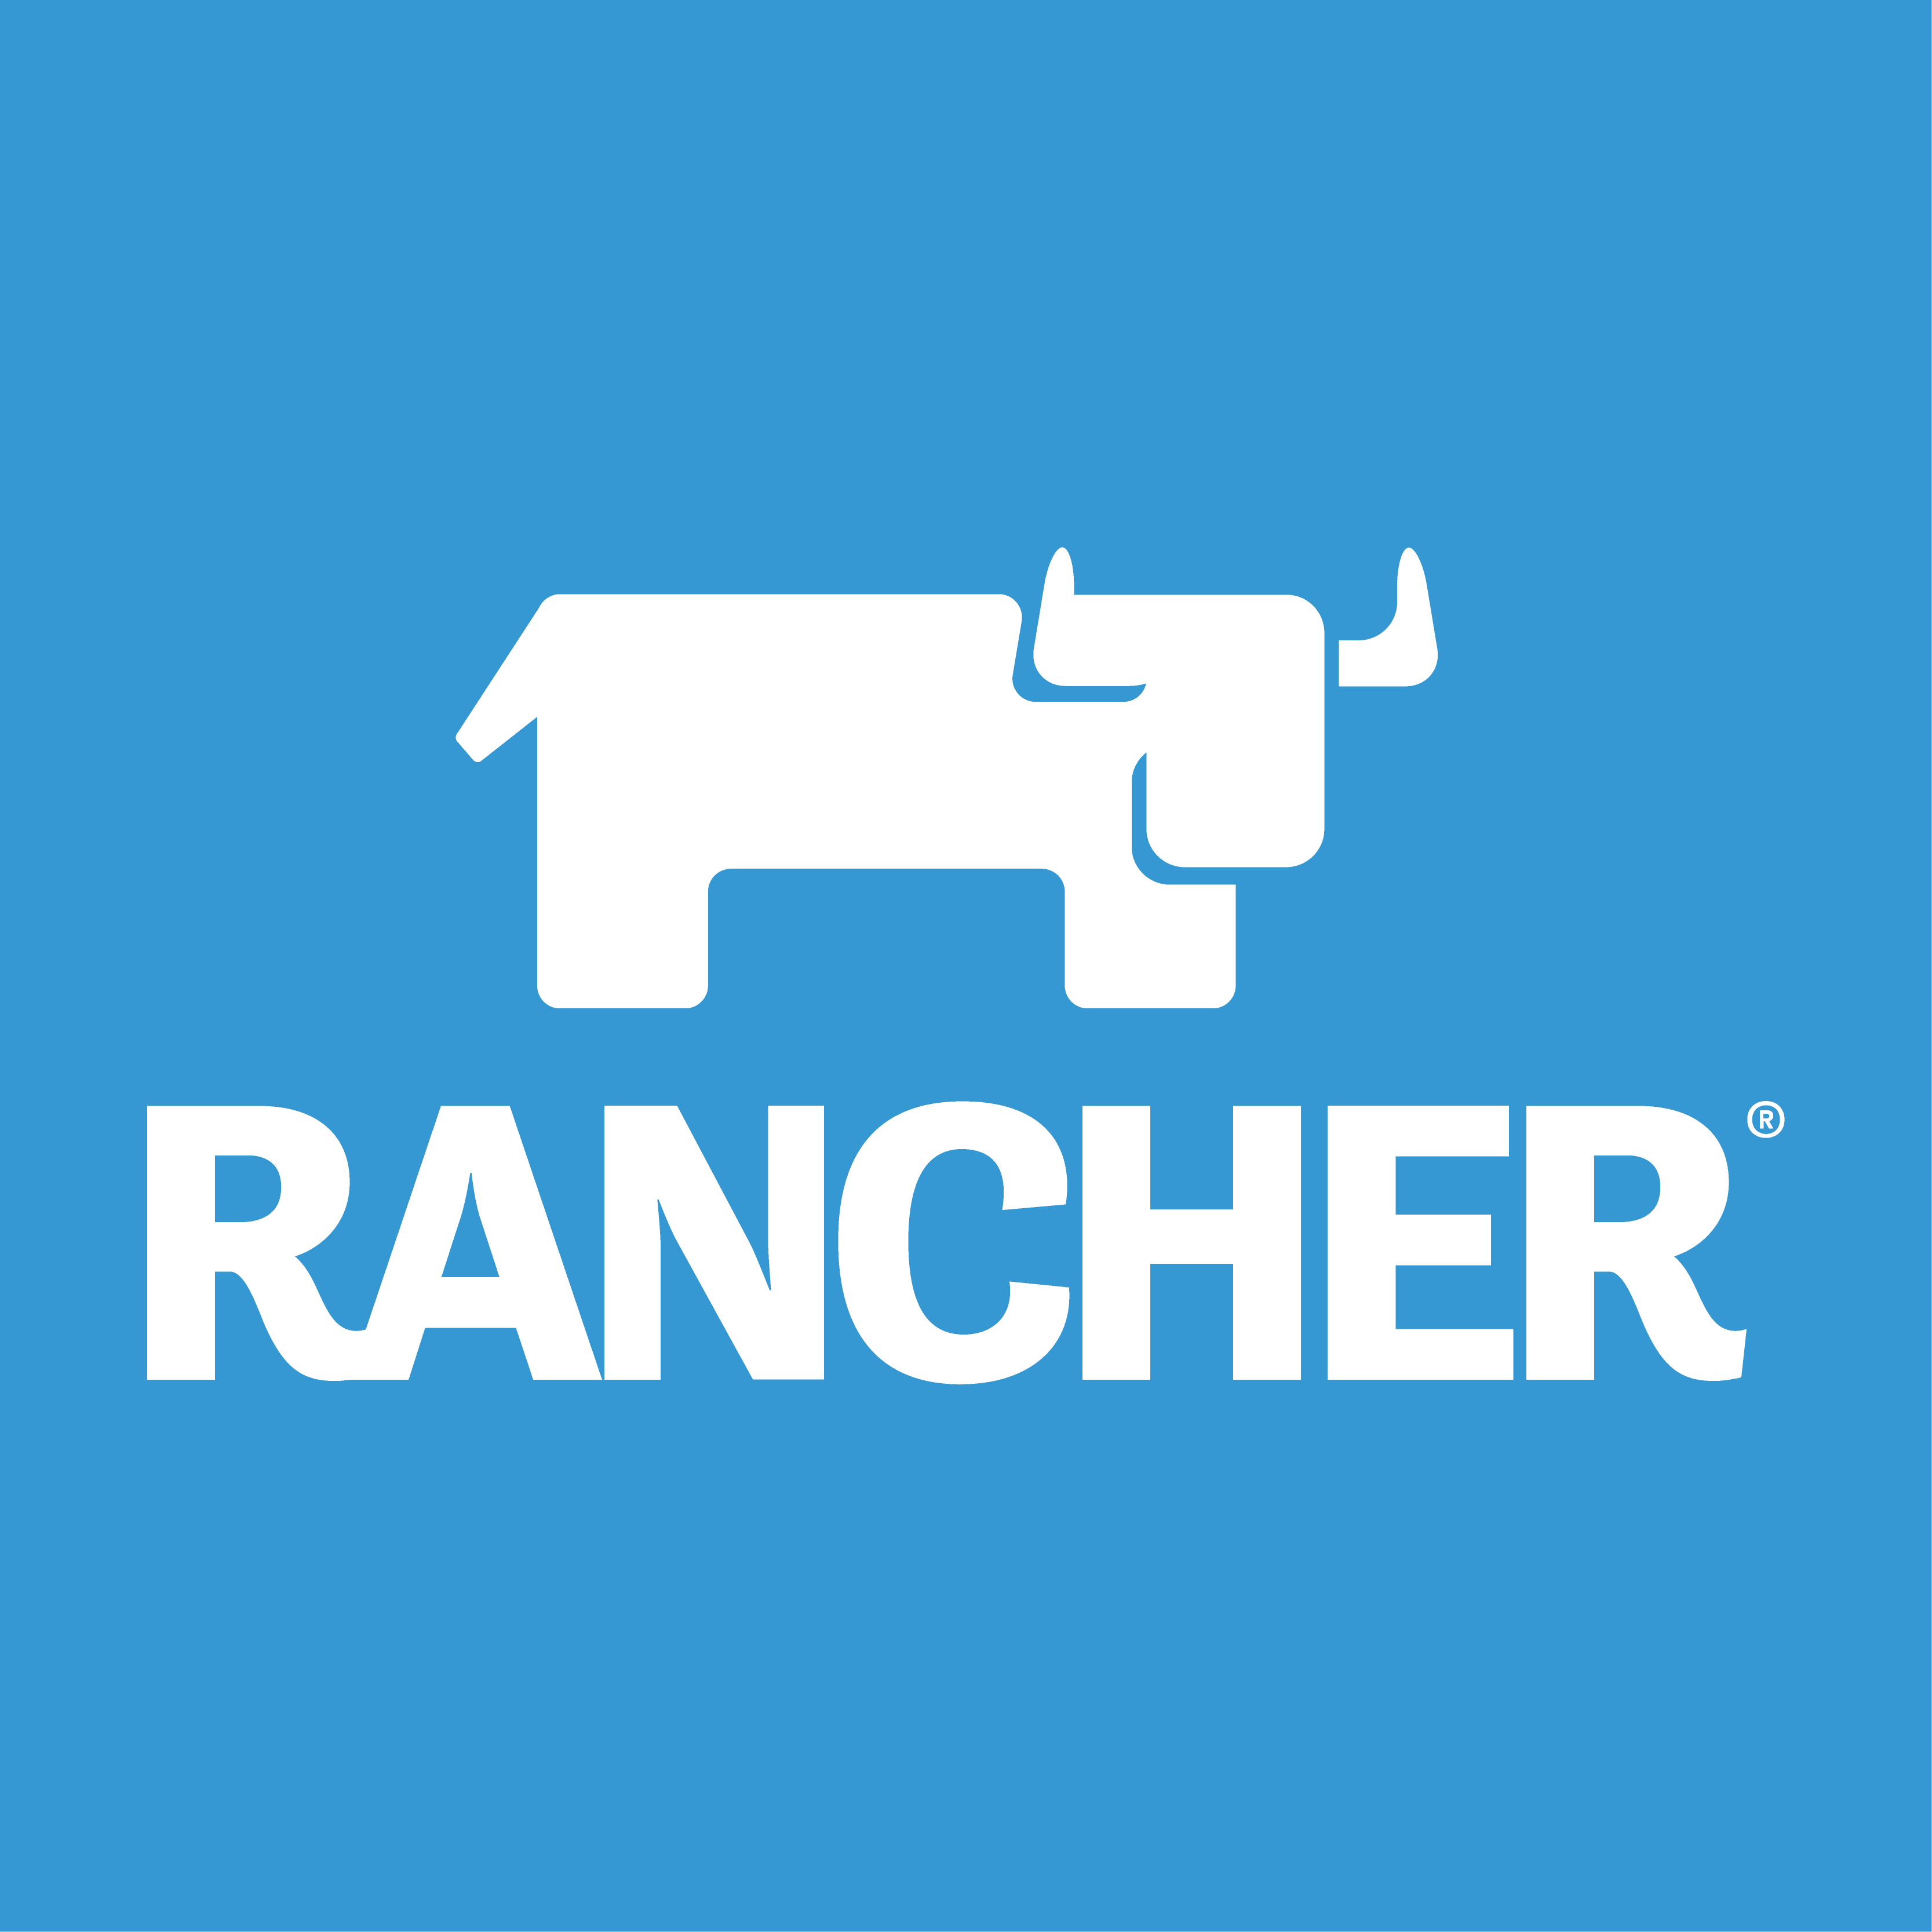 Several architectures for large-scale IoT edge container cluster management - 1-Rancher+K3s